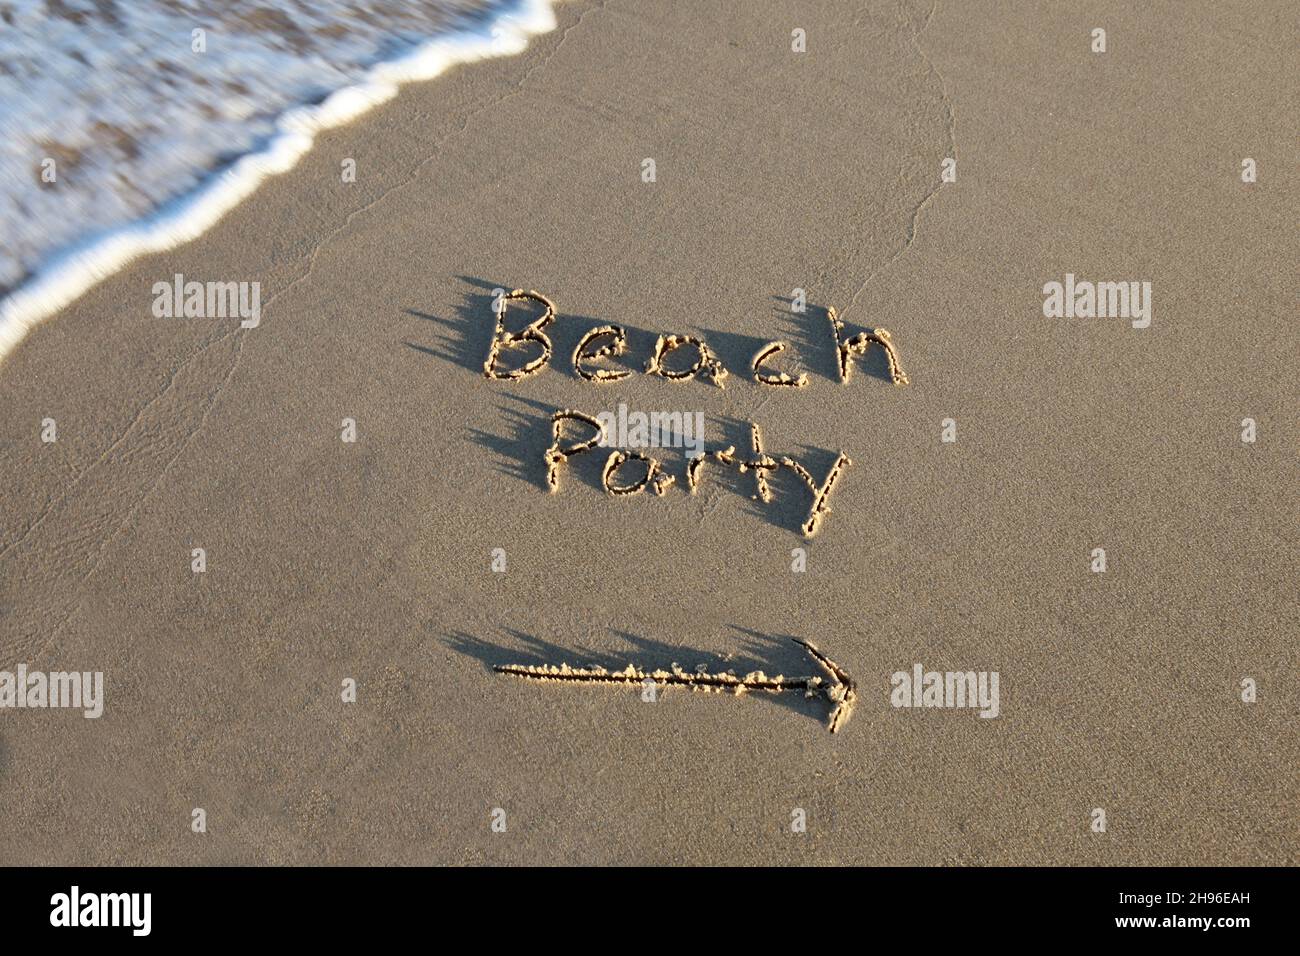 Beach party written in the sand at the beach. The arrow points the way. Wave with motion blur. Stock Photo